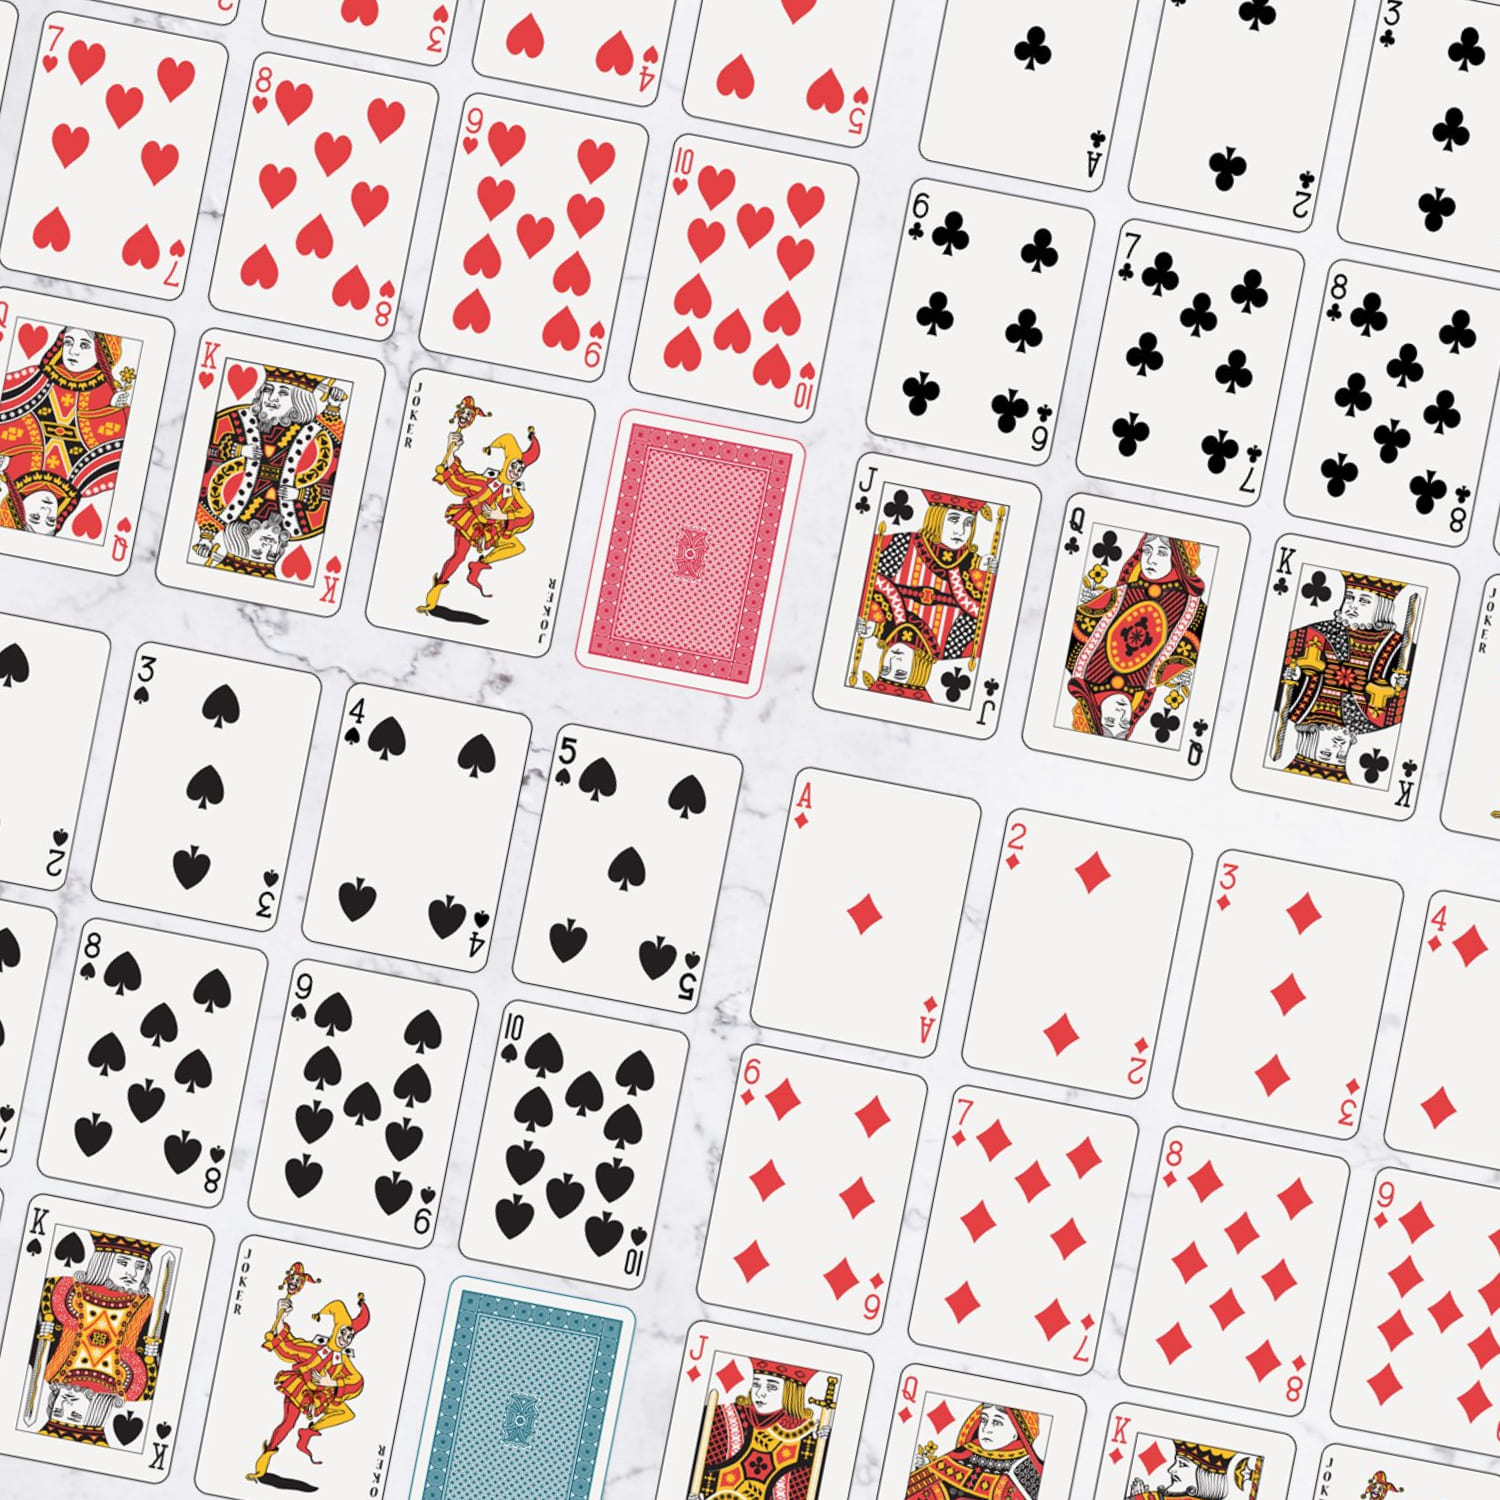 Playing cards clipart Created By Scrapbooking patterns and cliparts.